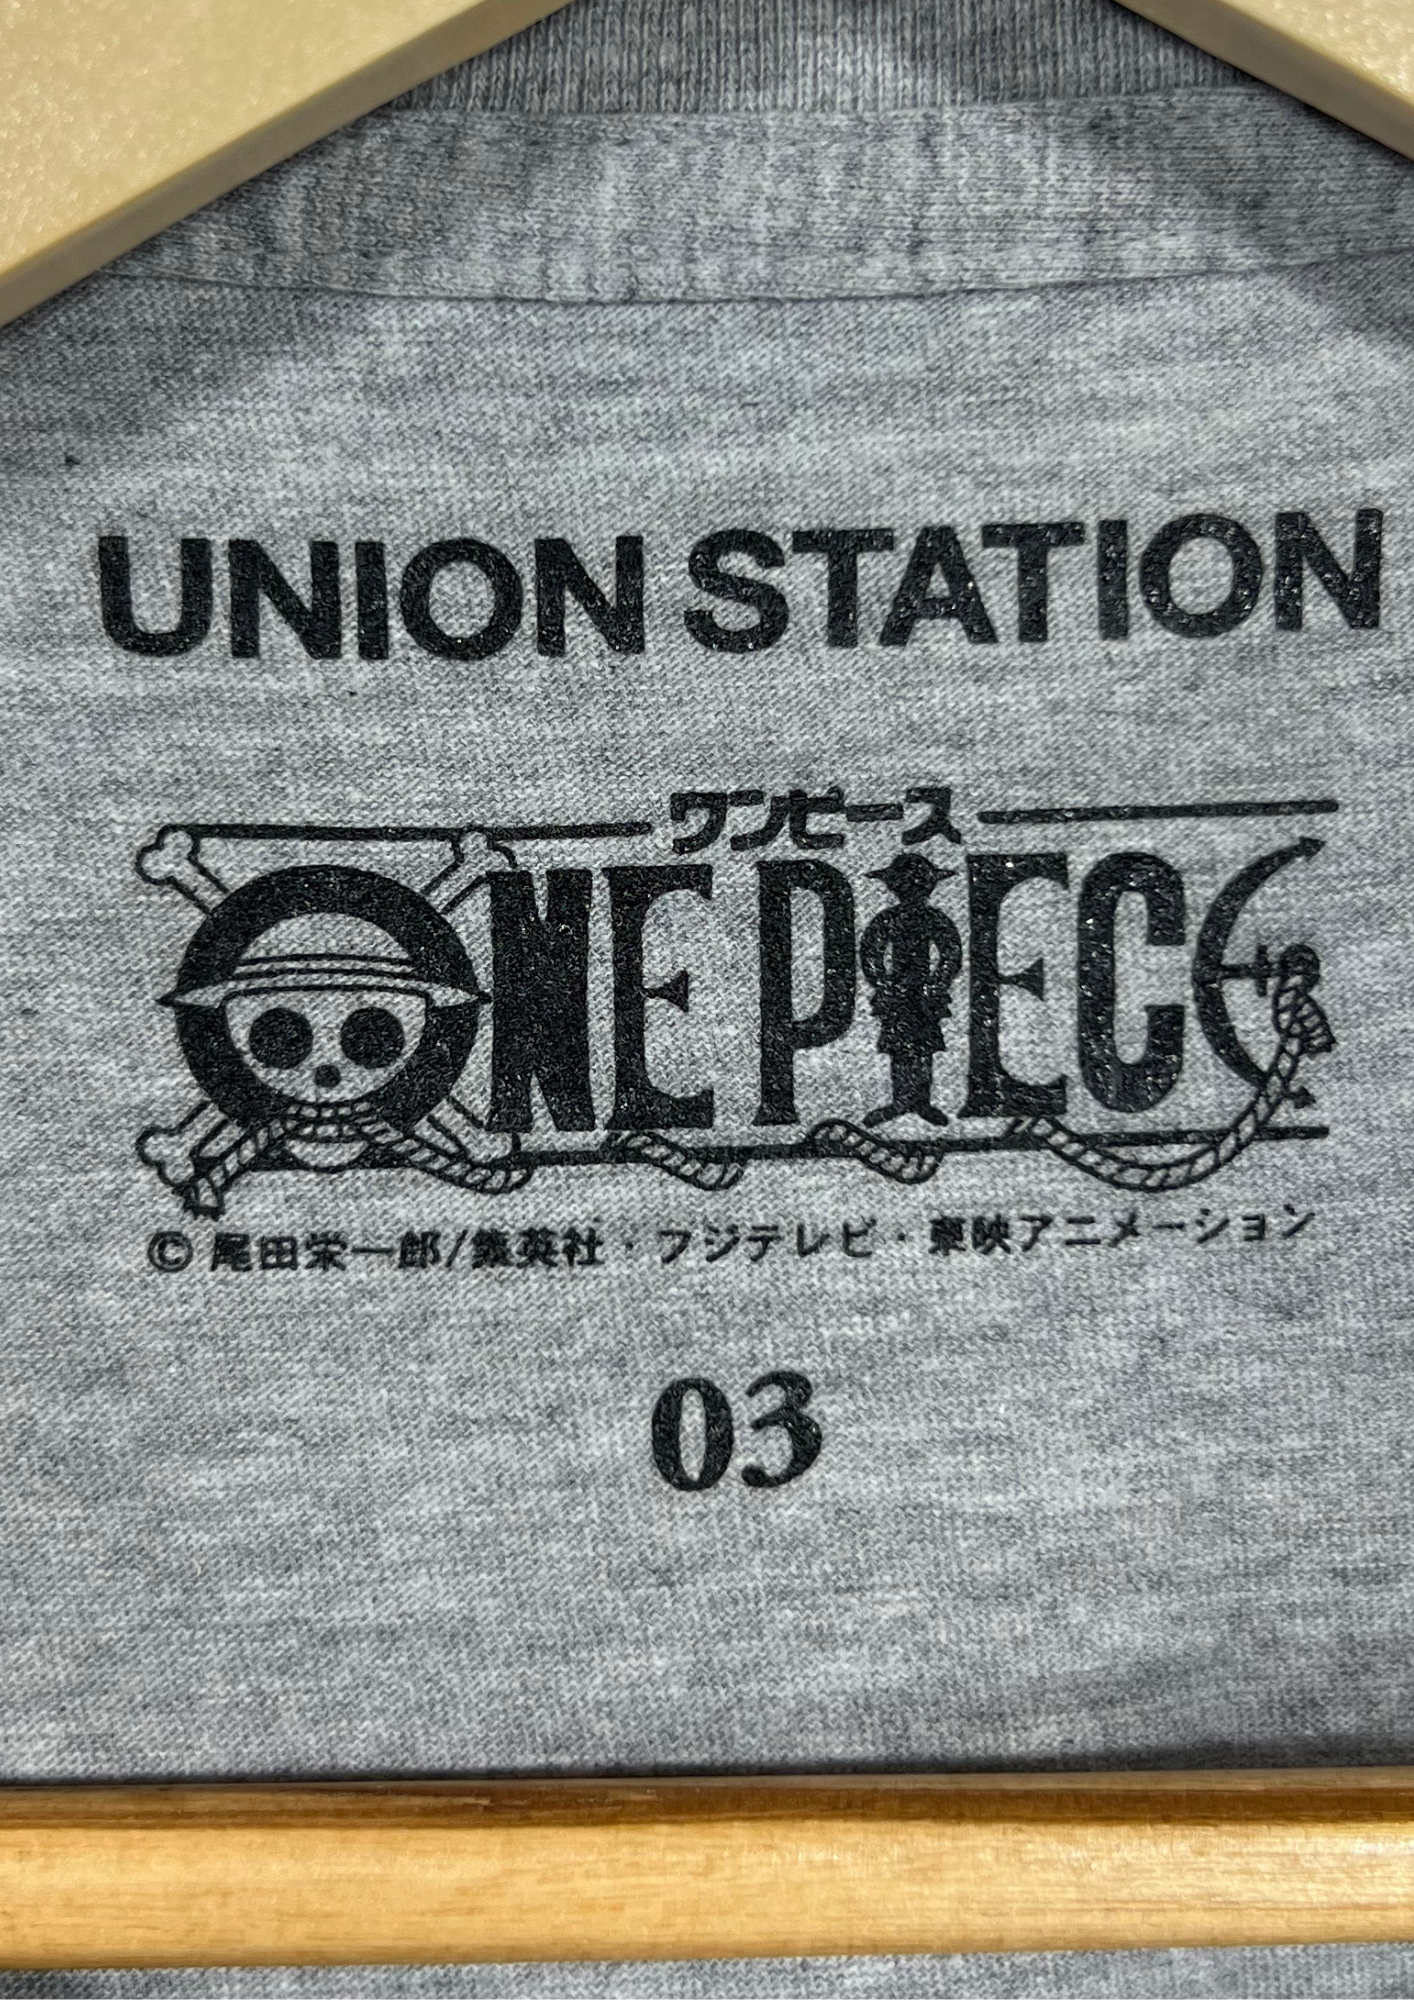 One Piece x Union Station The Greatfather T-shirt